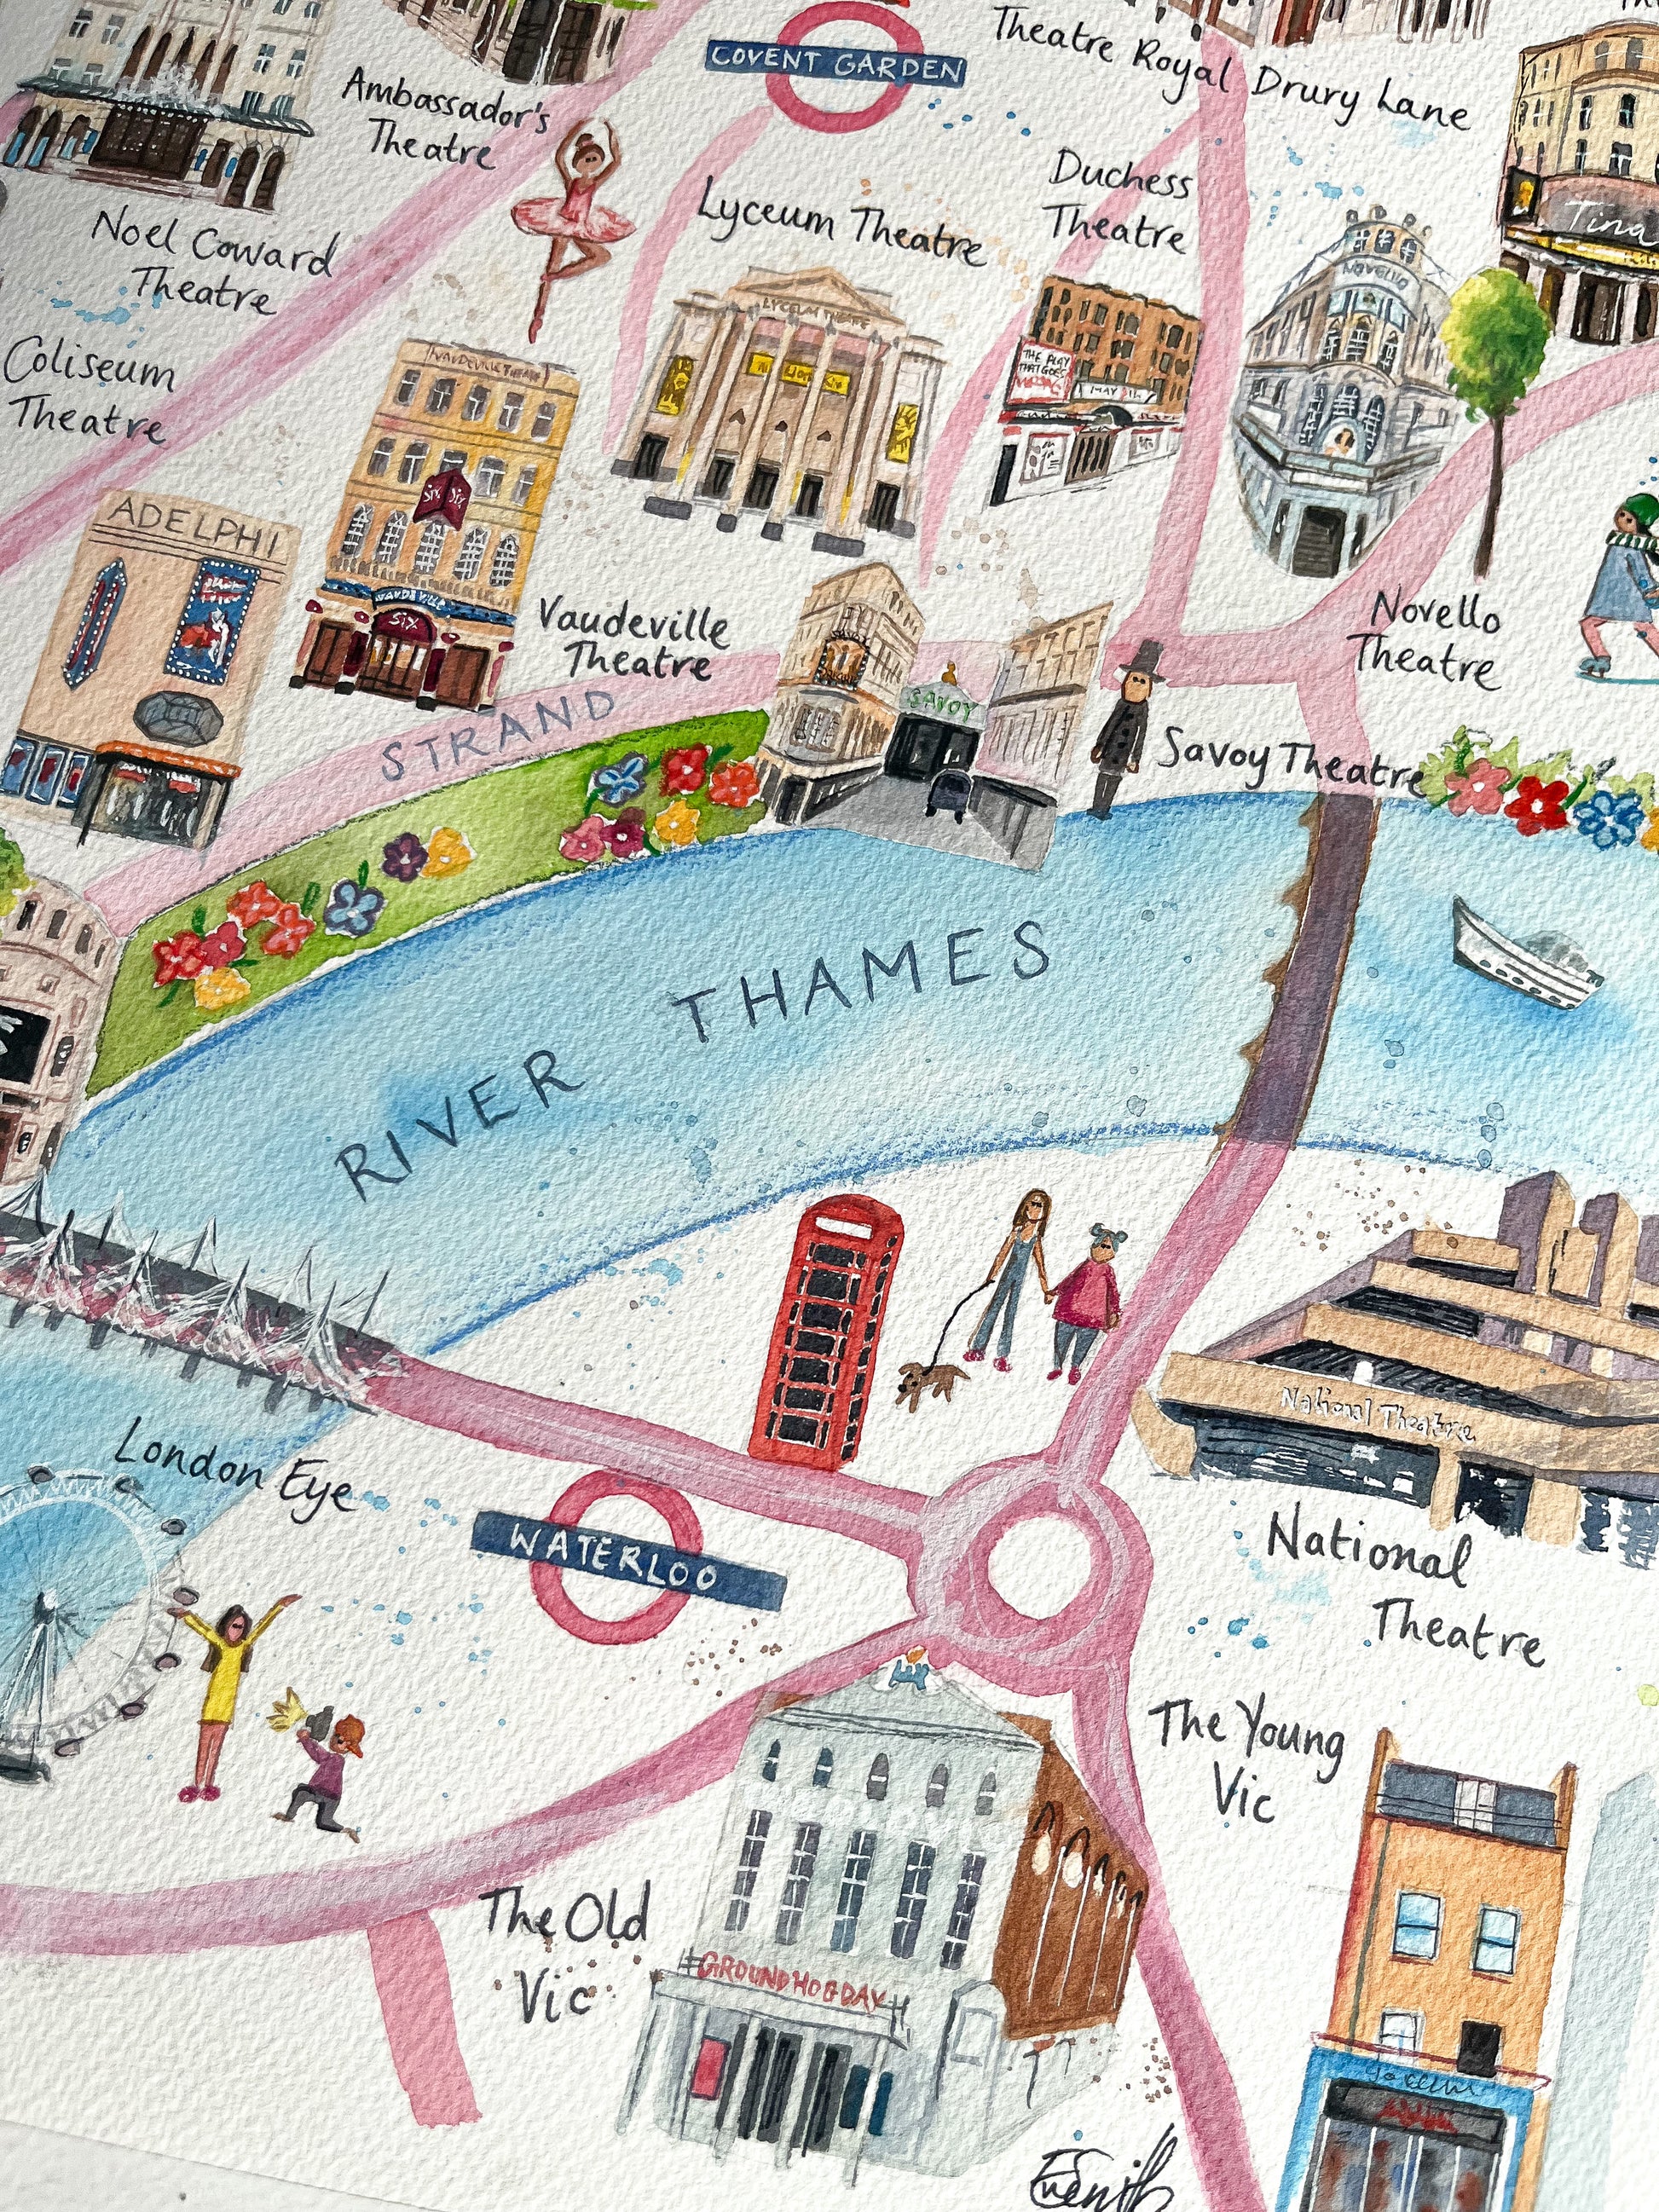 A close up photo of an illustrated West End map by Eve Leoni Art, featuring watercolour paintings of the Vaudeville Theatre, Savoy Theatre, Novello Theatre and National Theatre.